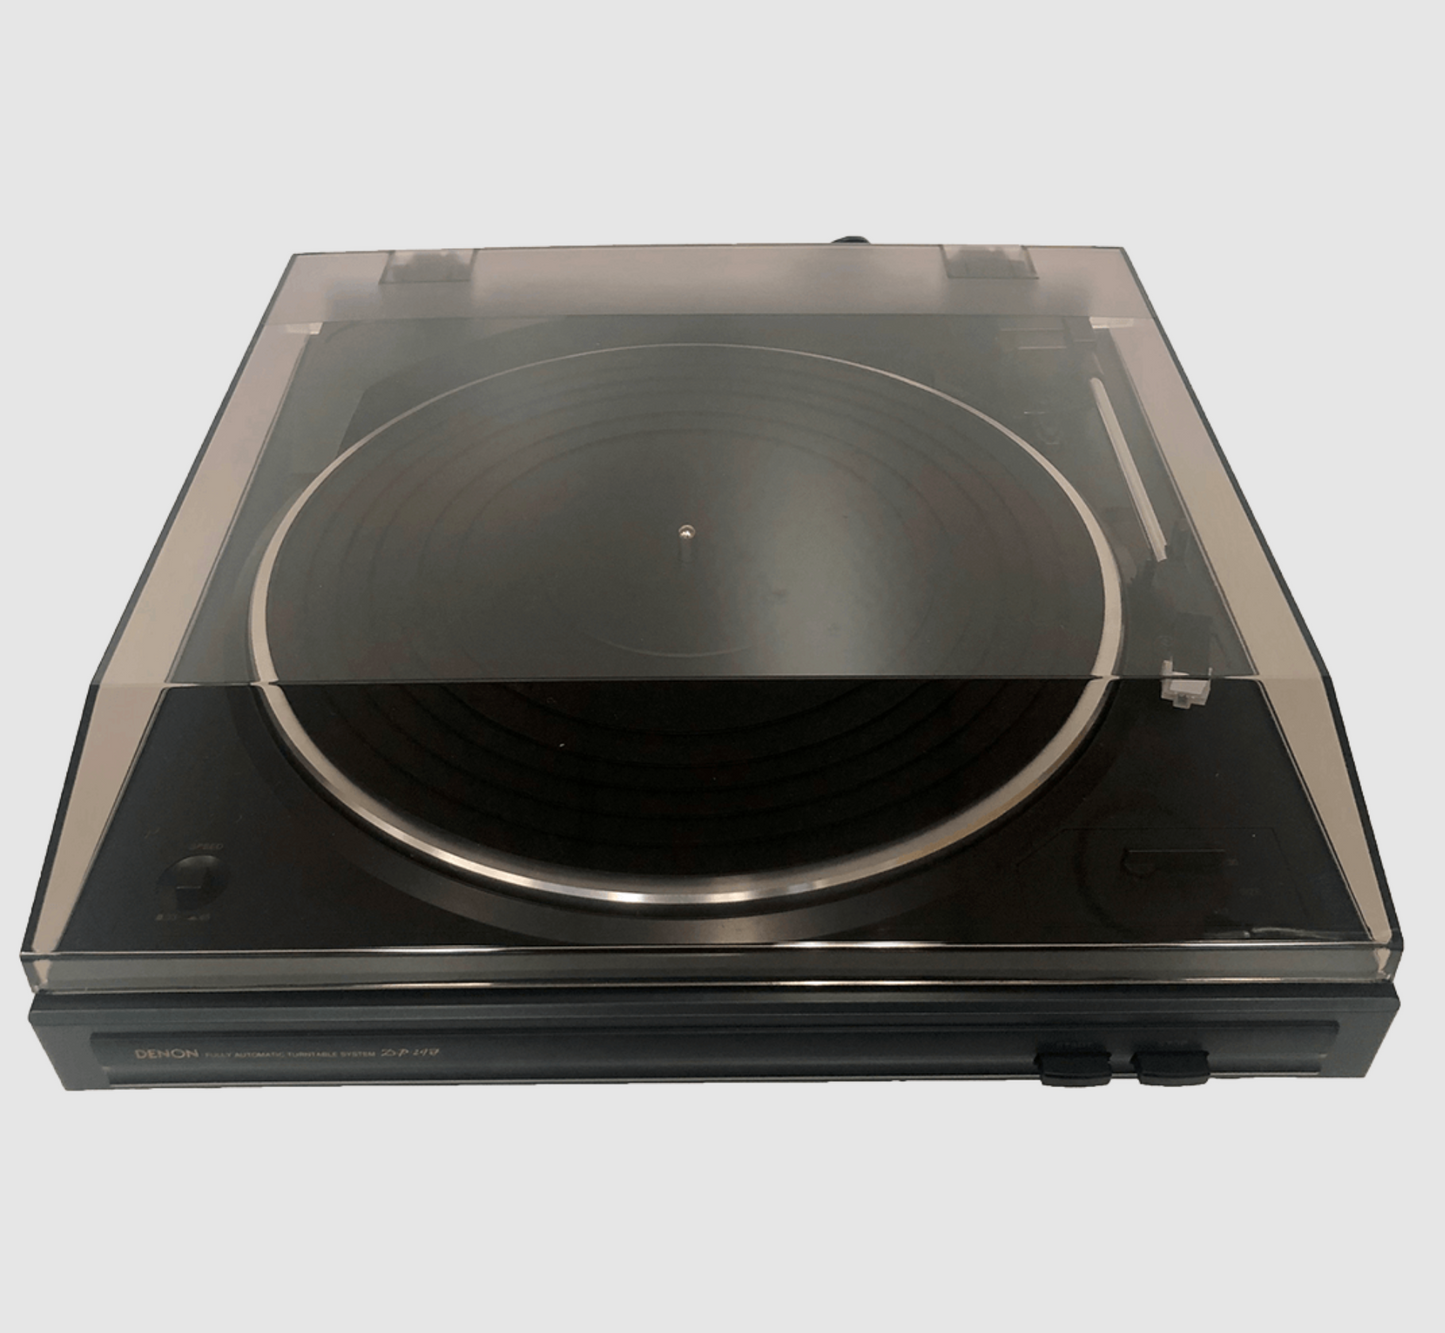 Denon DP-29 FA/FE Fully Automatic Turntable, with dustcover on